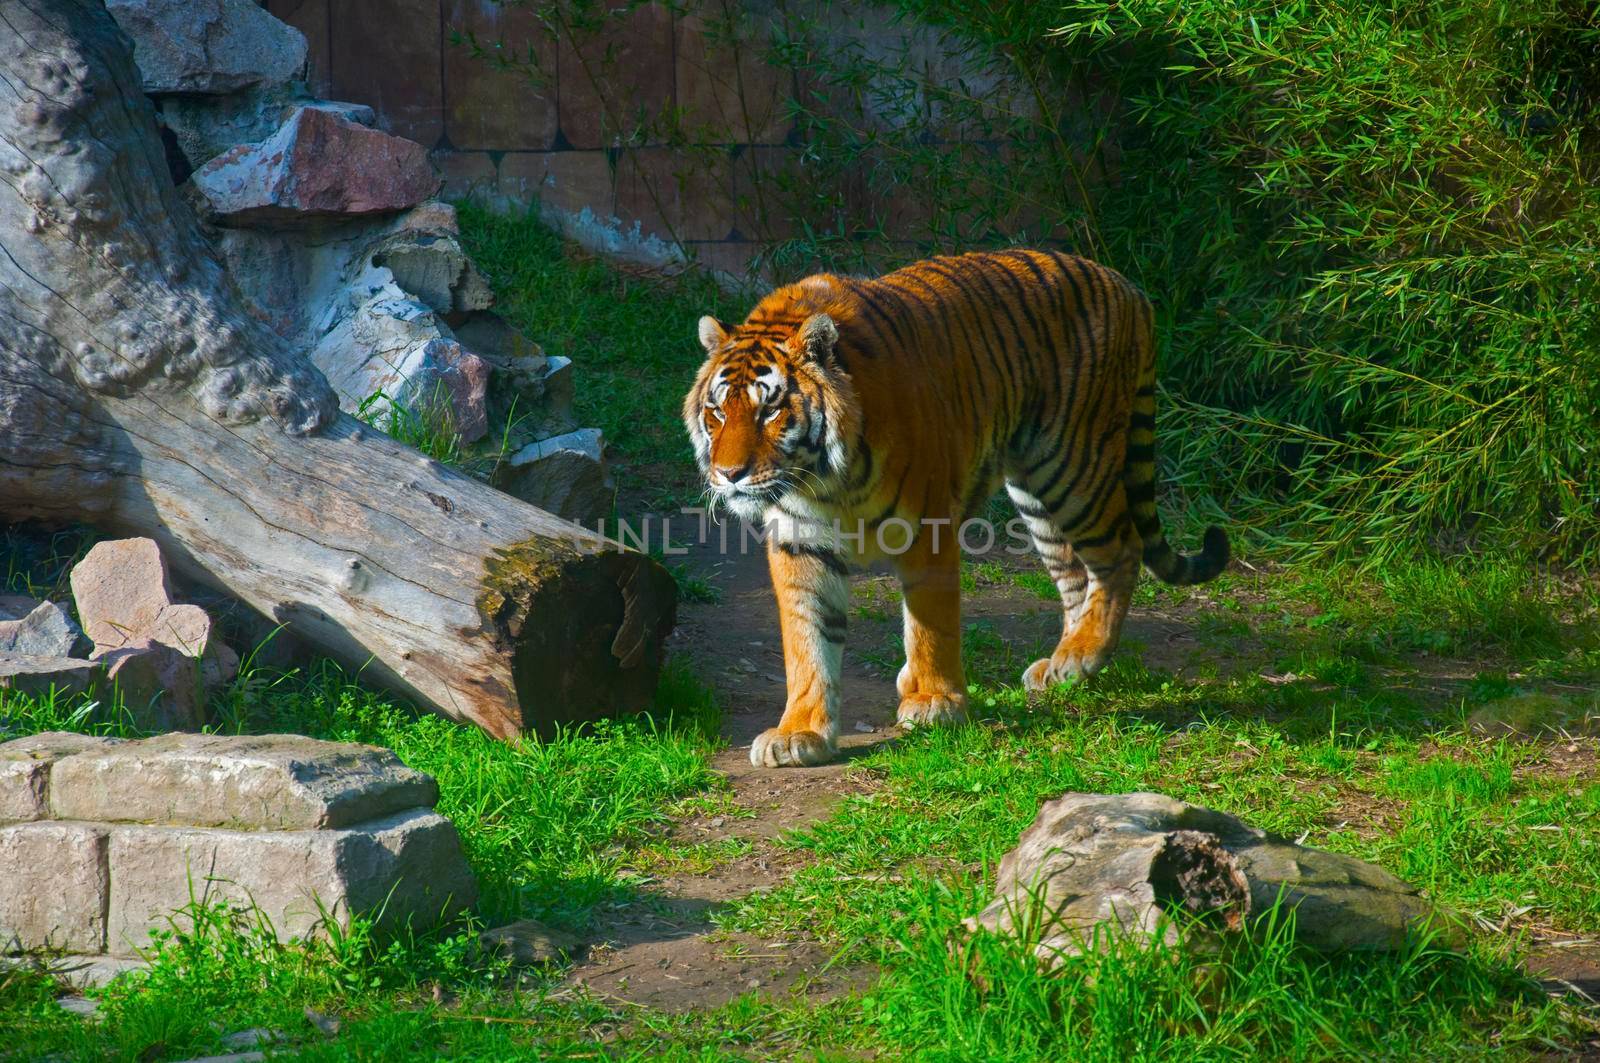 Big tiger walking, green background with bricks and dry wood, autumn